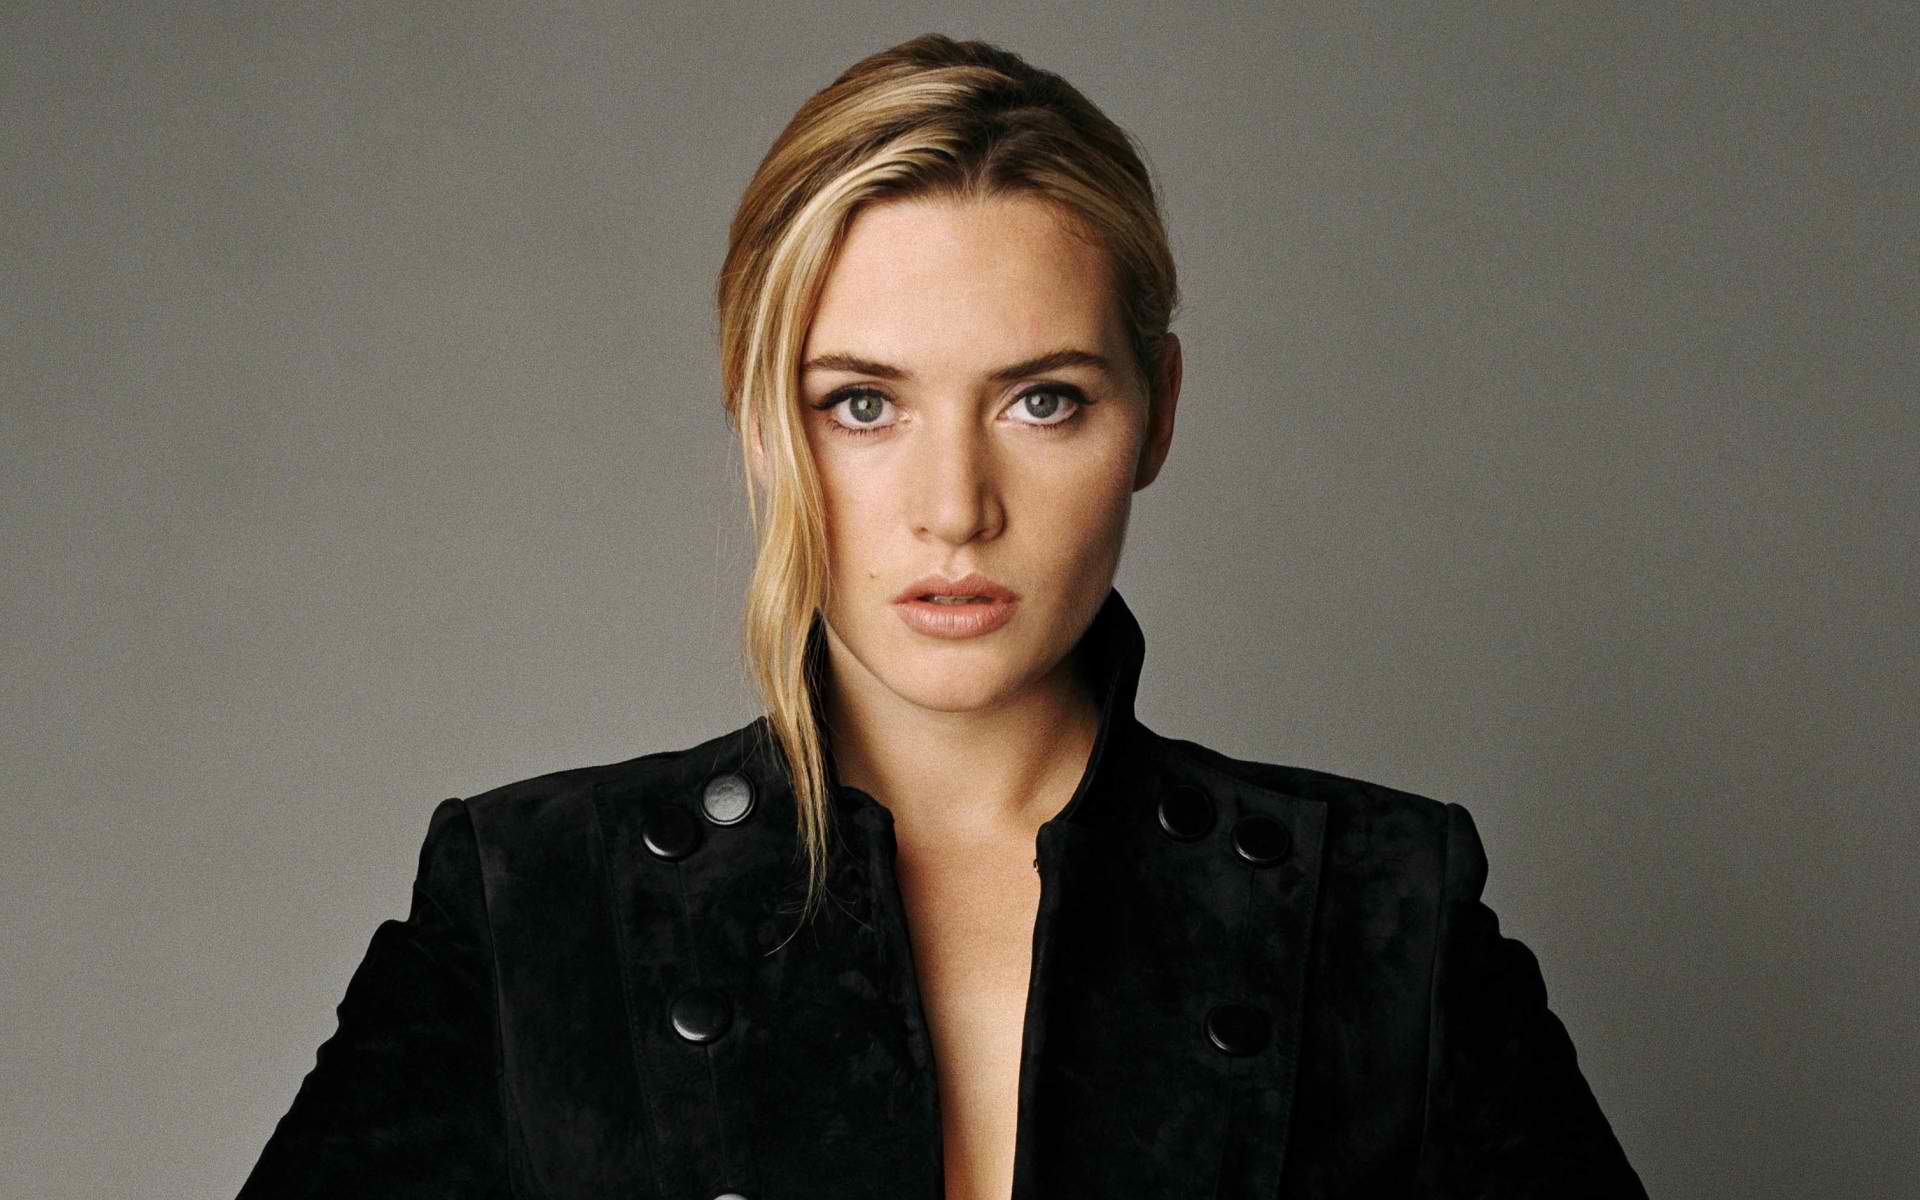 Kate Winslet reportedly in talks to play female lead in Jobs biopic